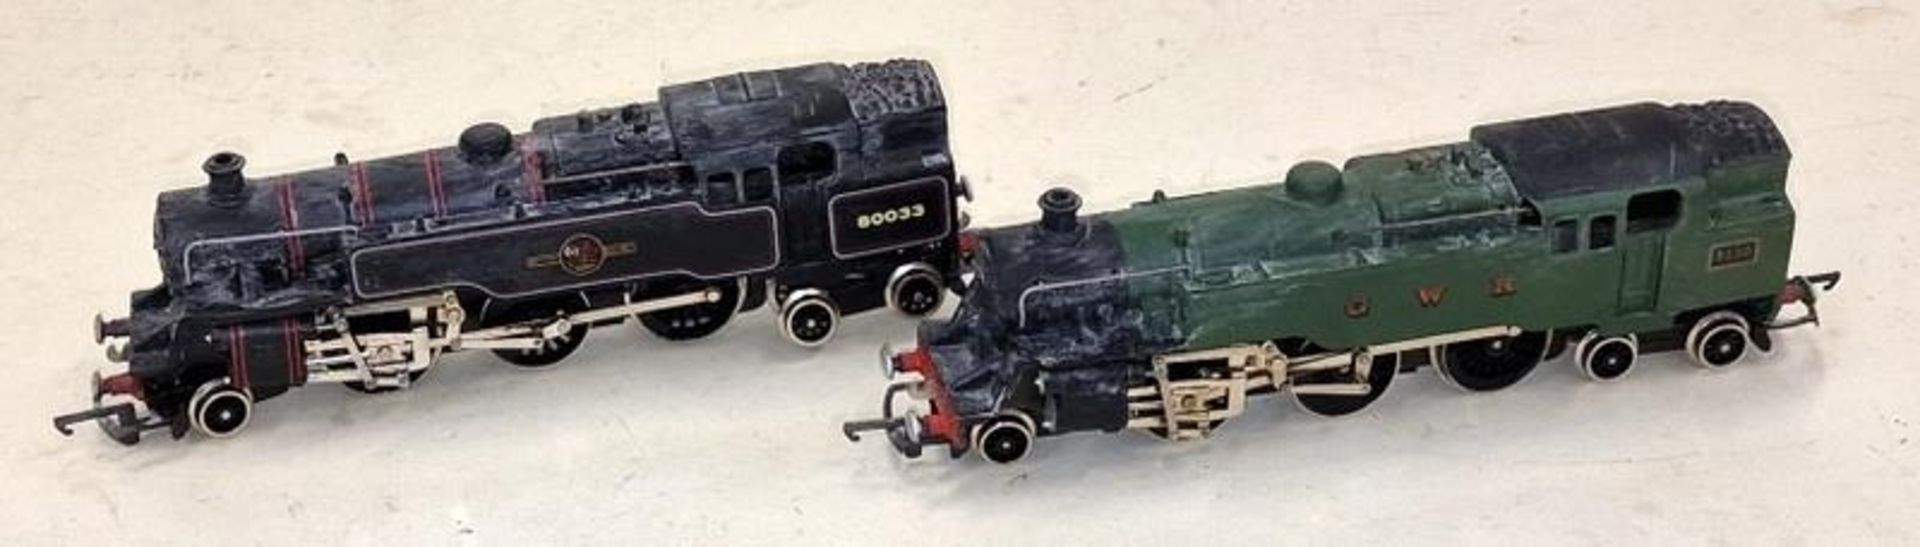 Two OO Gauge locomotives to include GWR 8230 and British railways 80033- previously displayed so